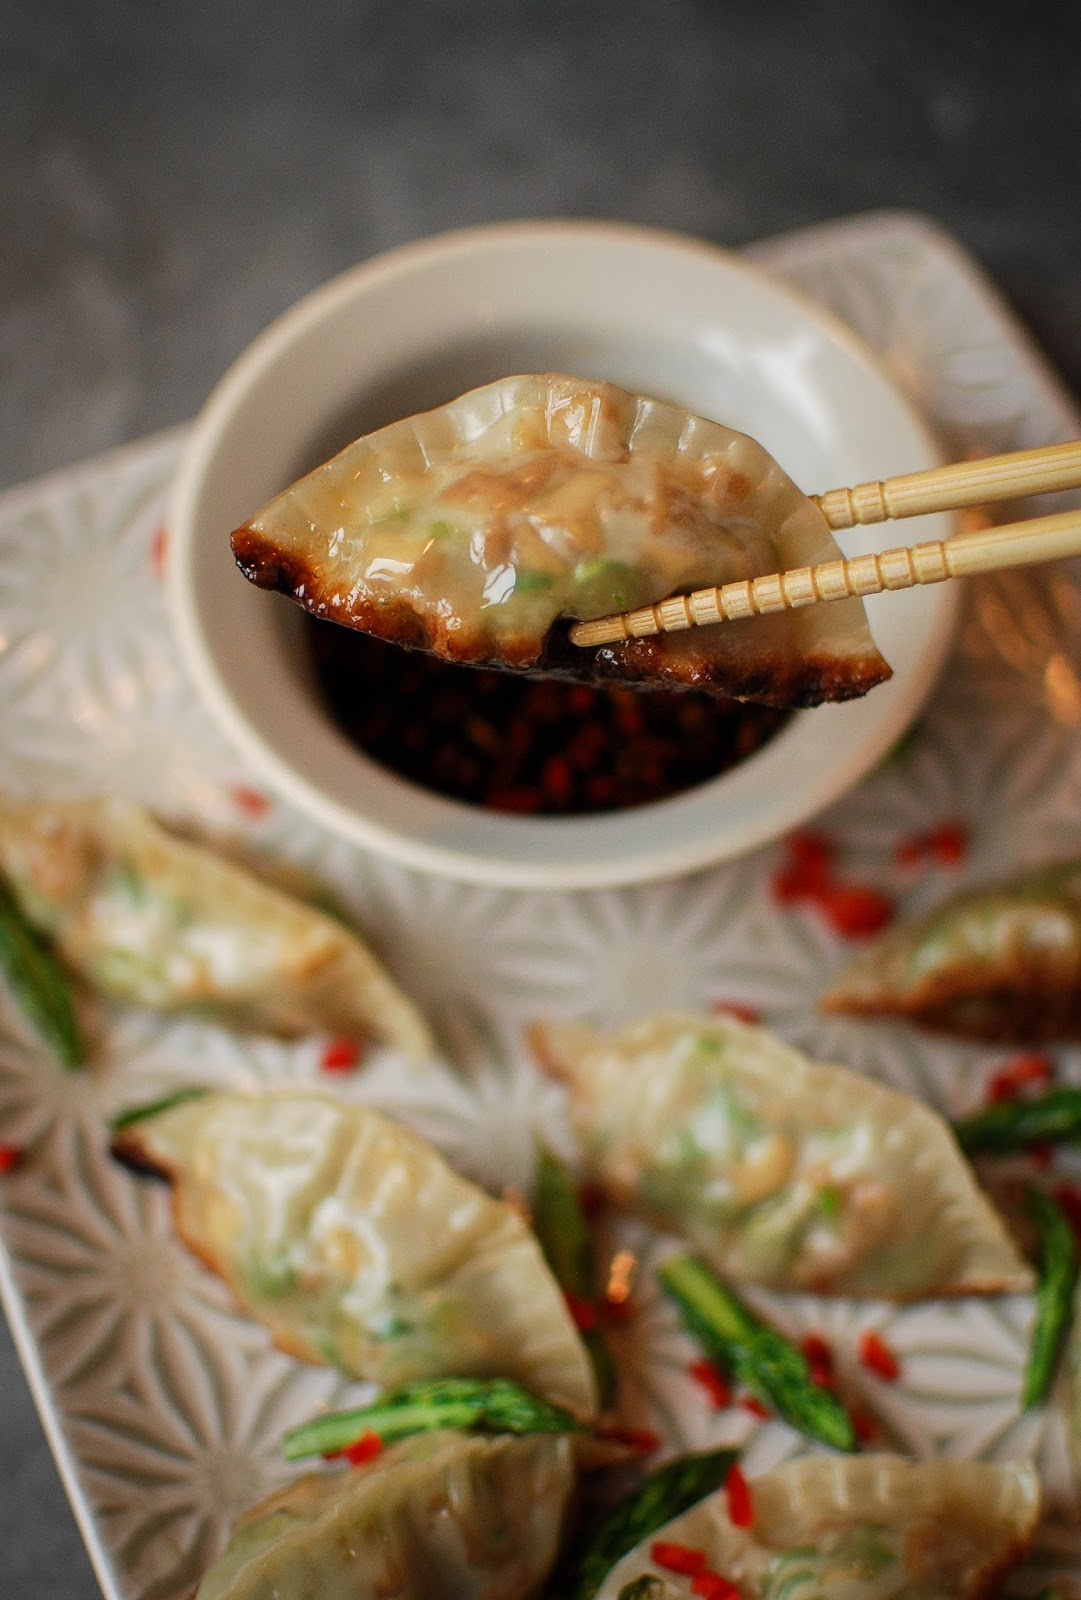 These little steamed dumplings are the perfect treat for vegan and vegetarian diets.